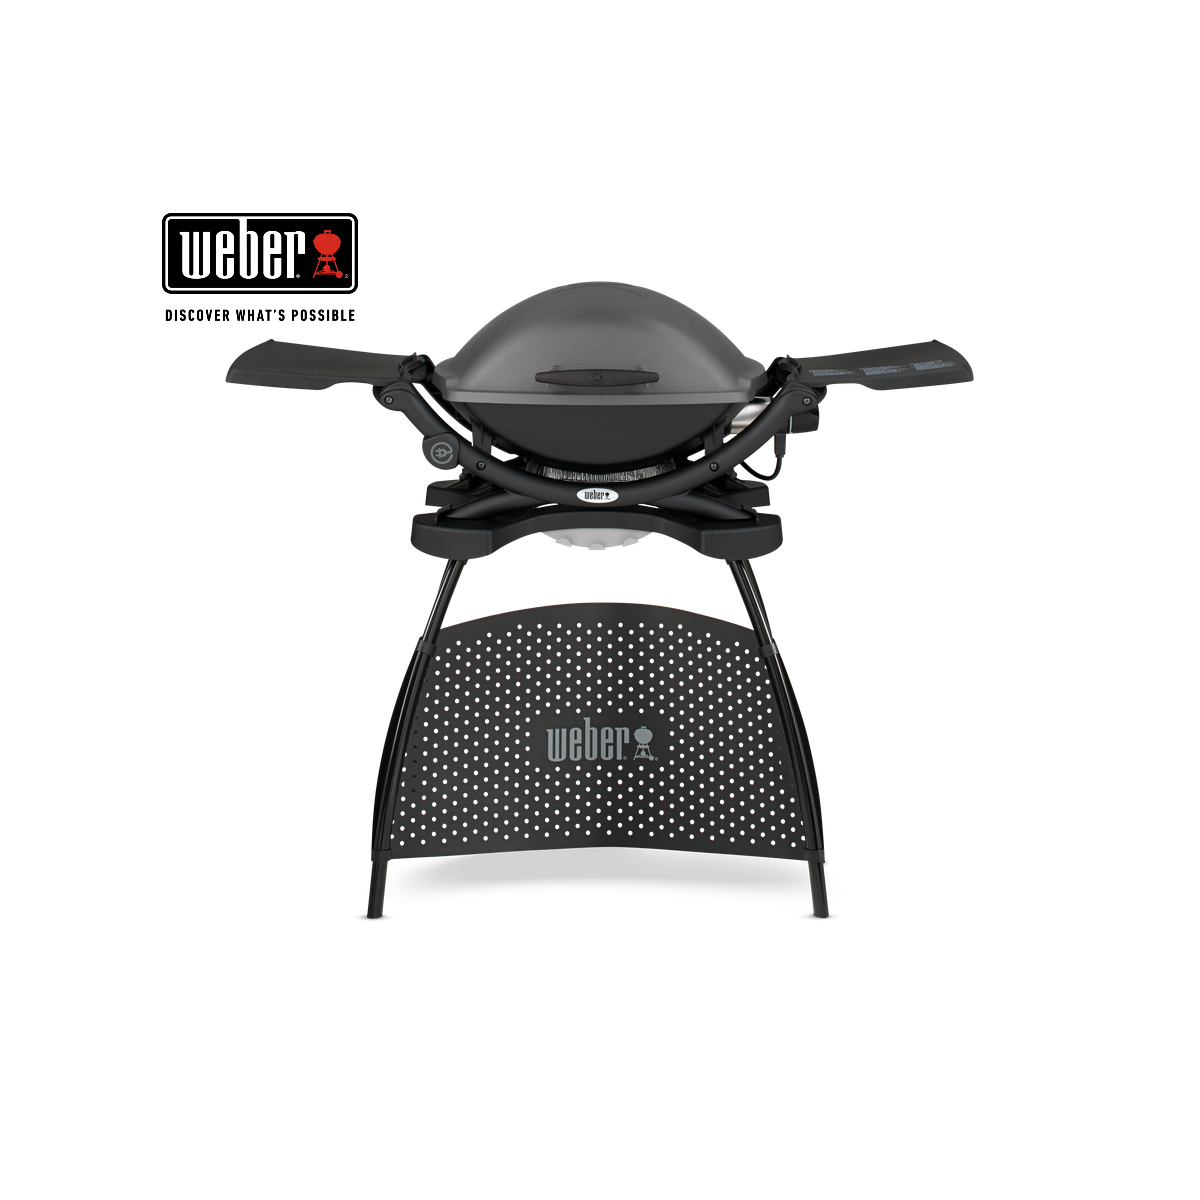 WEBER Q 2400 electric grill with stand, 55020853